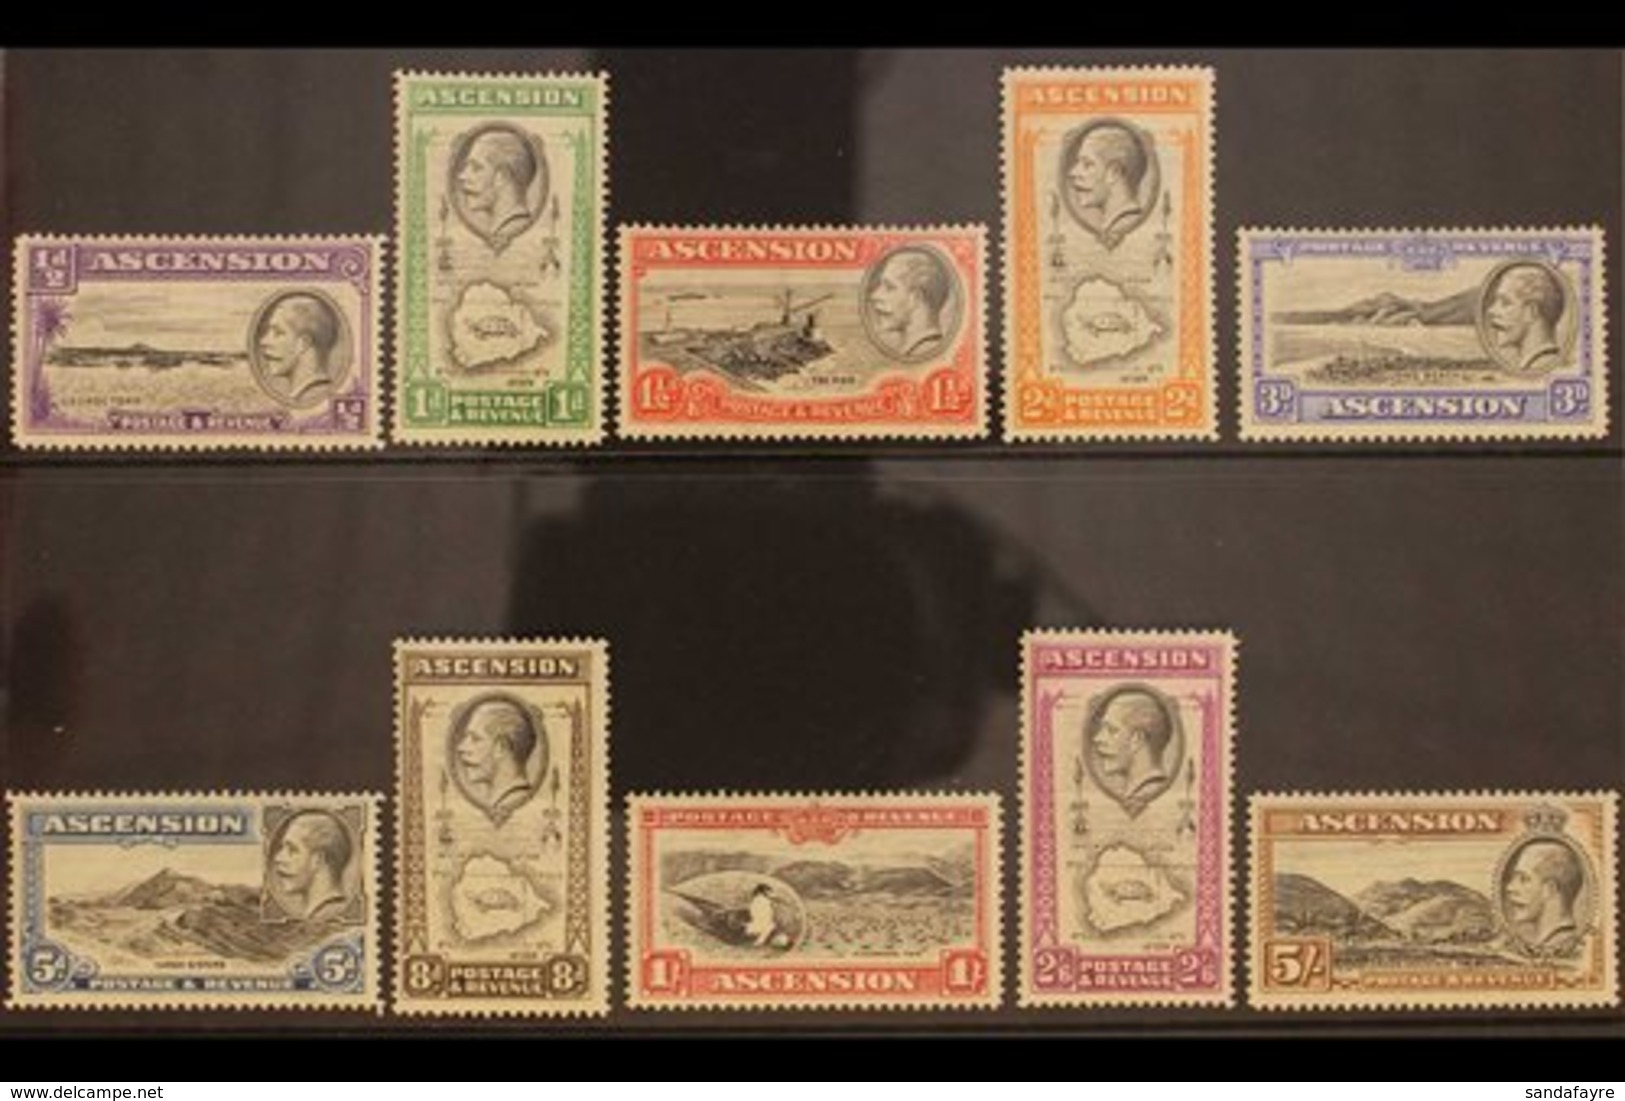 1934  Pictorial Definitives Complete Set, SG 21/30, Very Fine Mint, Extremely Lightly Hinged - Some Values Apparently Ne - Ascension